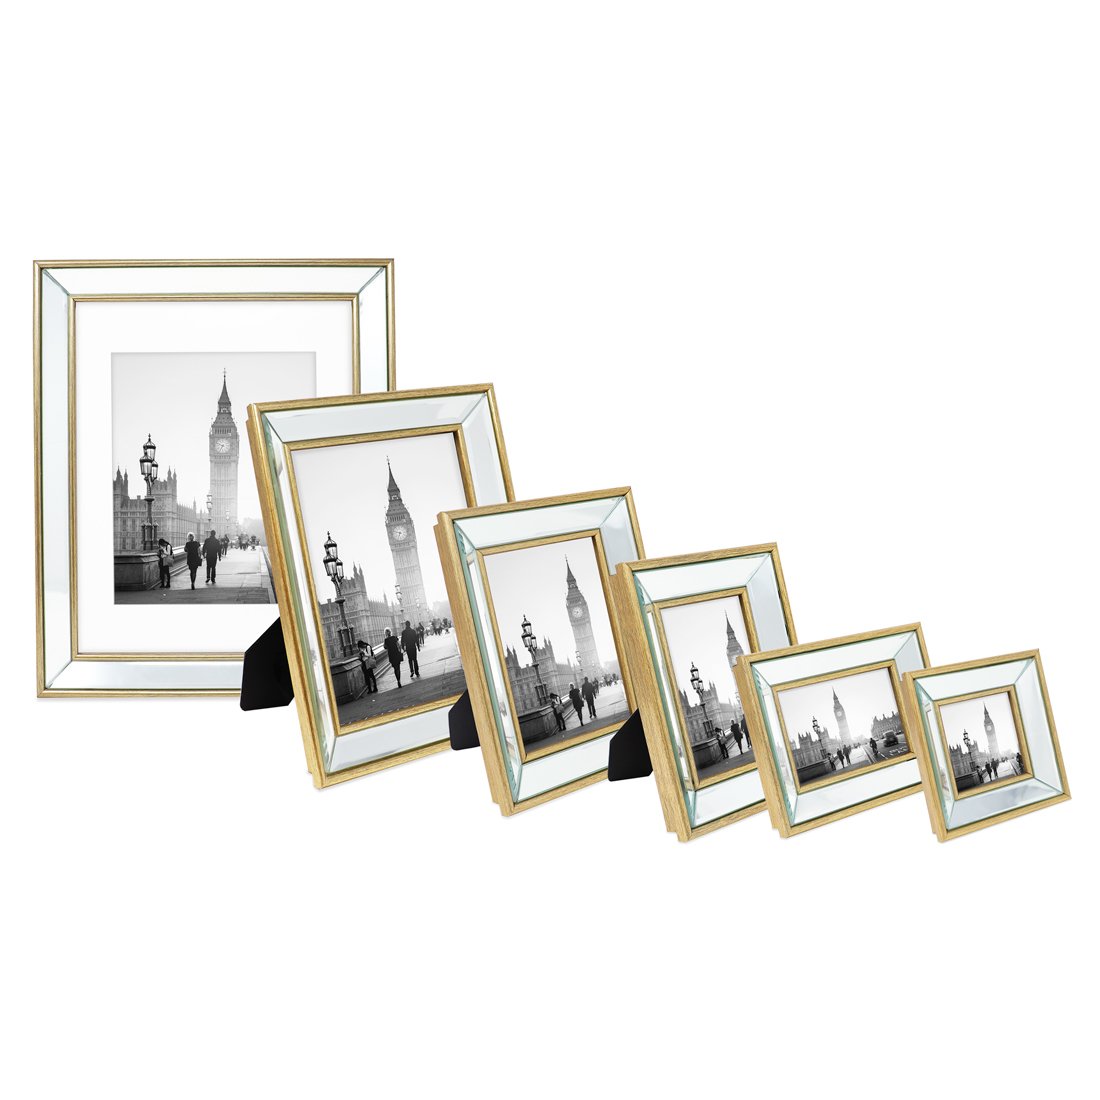 Isaac Jacobs 11x14 (8x10 Mat) Champagne Mirror Bead Picture Frame - Classic  Mirrored Frame with Dotted Border Made for Wall Display, Photo Gallery and